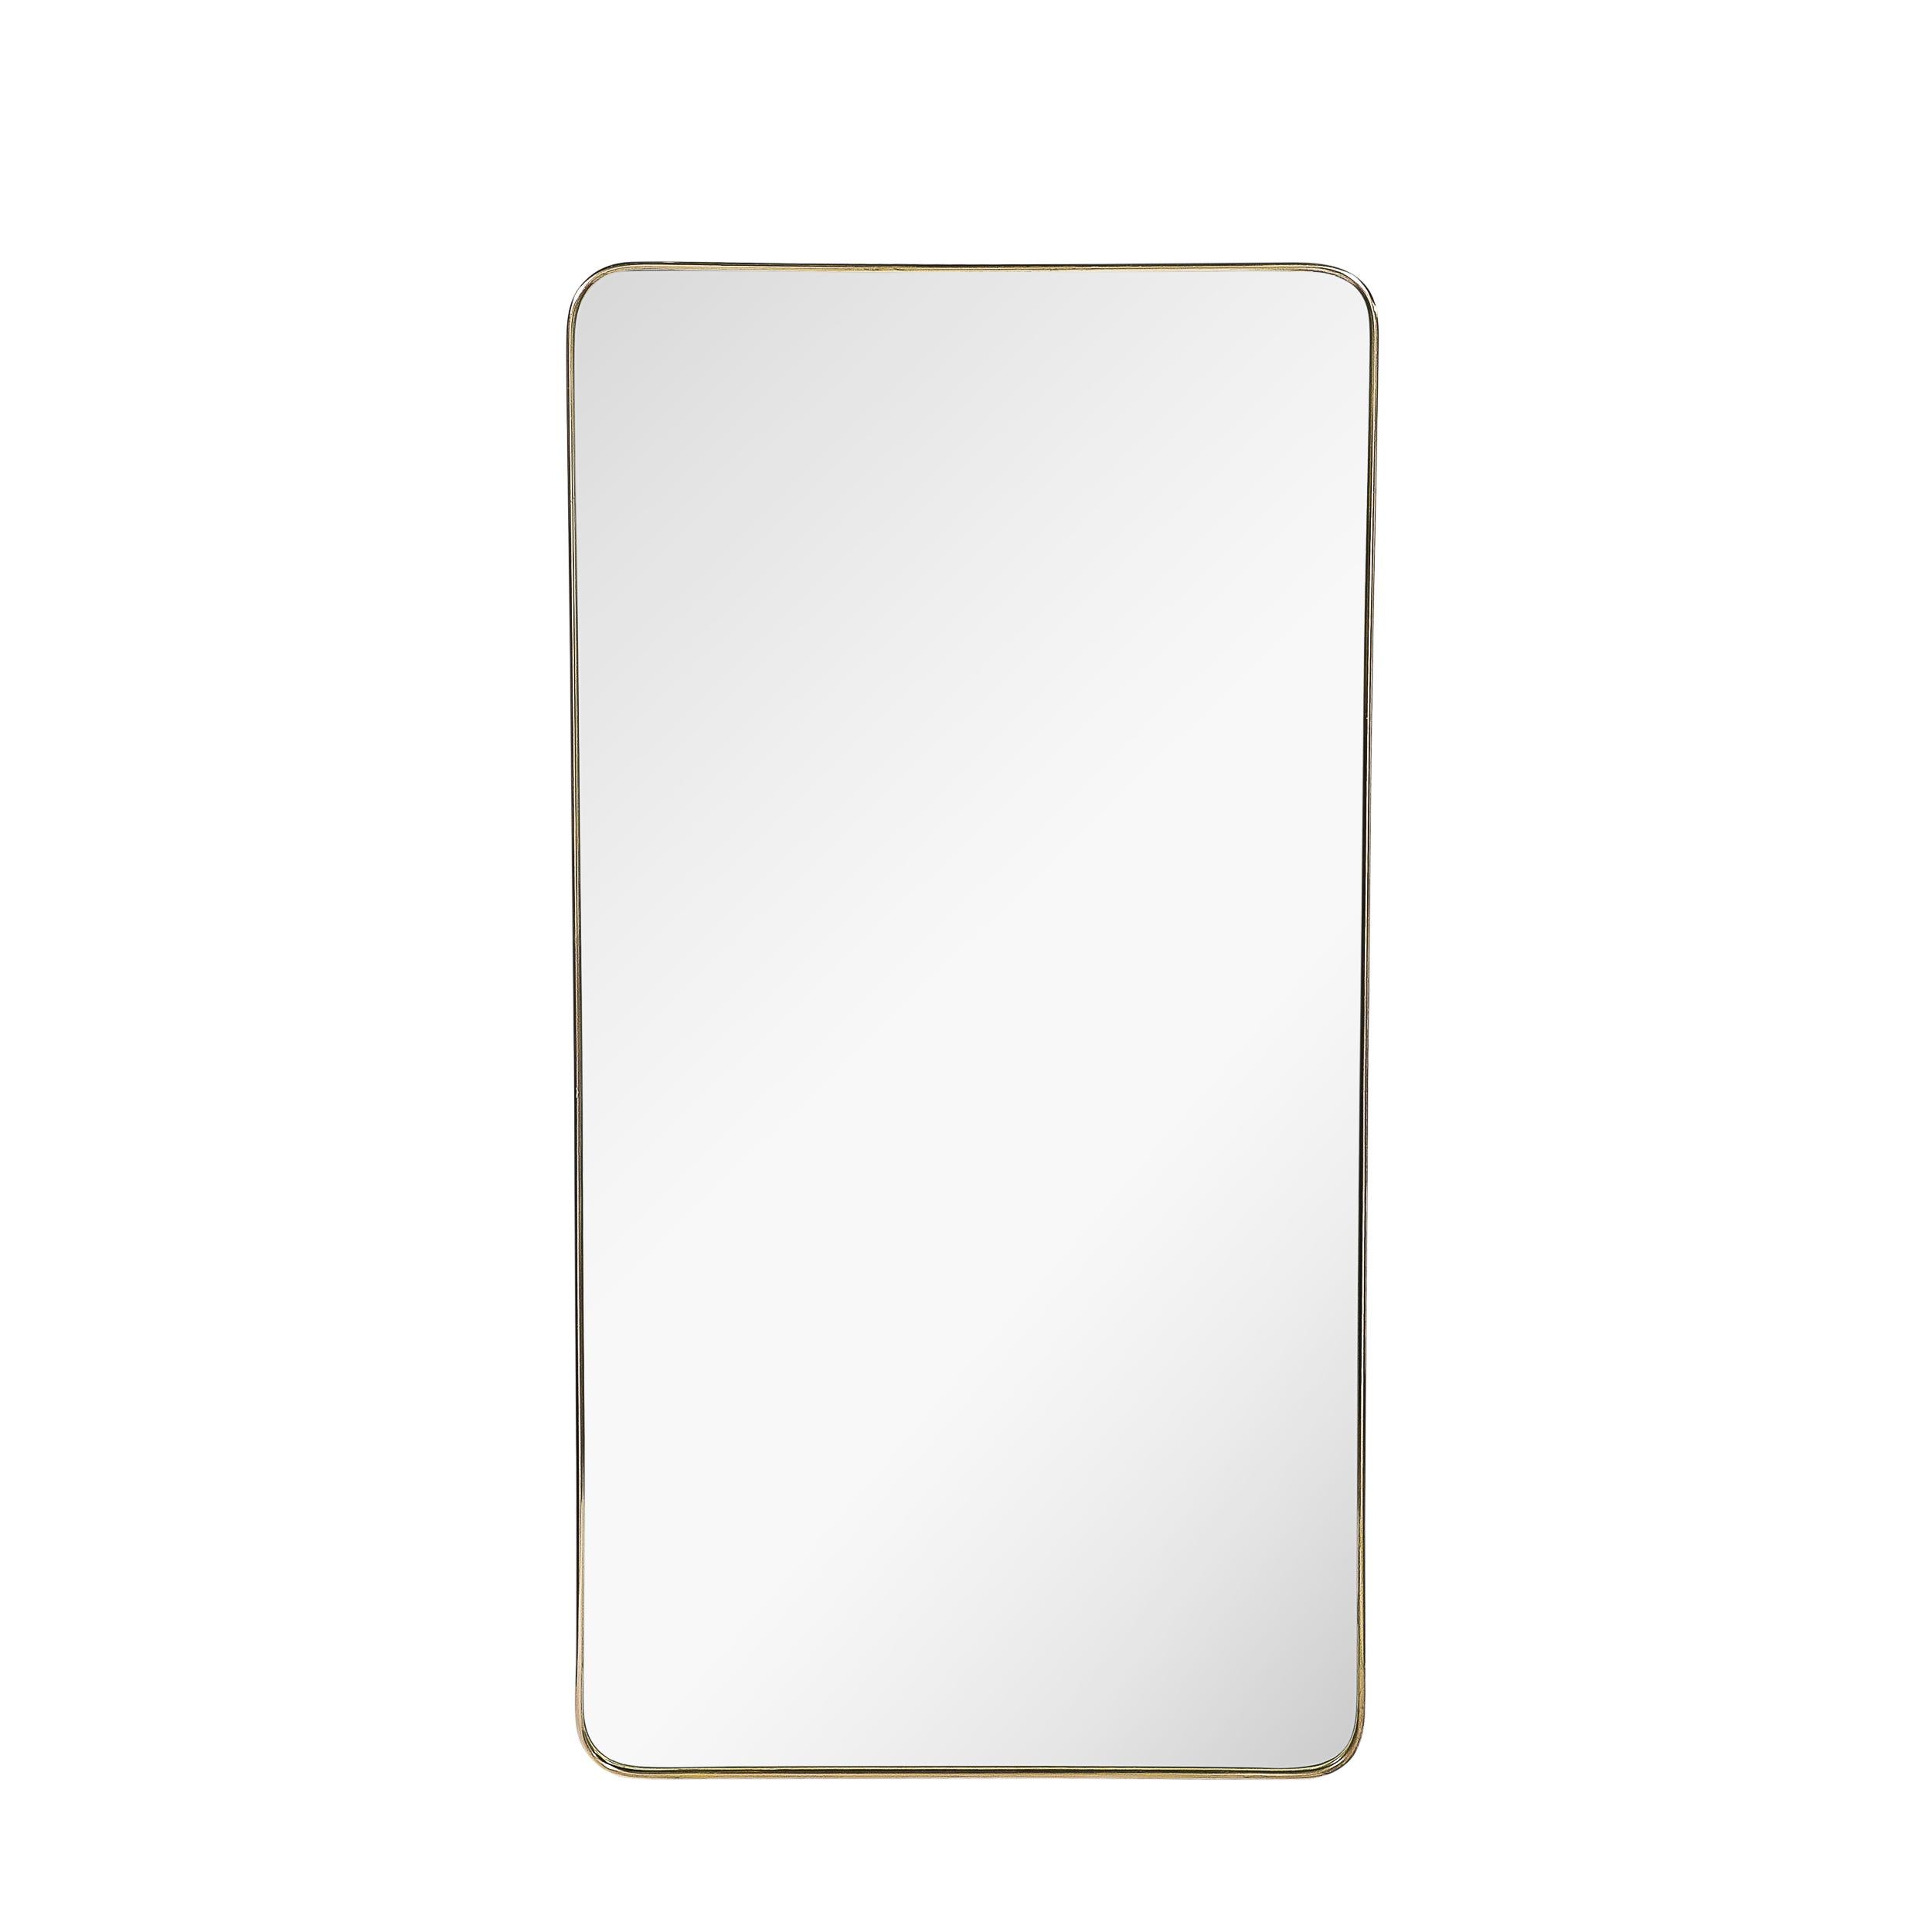 This beautiful Mid-Century Modernist Rectangular Brass Wrapped Mirror originates from Italy, Circa 1960. It features a rectangular form with subtly rounded shoulders. The lustrous brass frame hugs forward slightly over the plain mirror that adorns